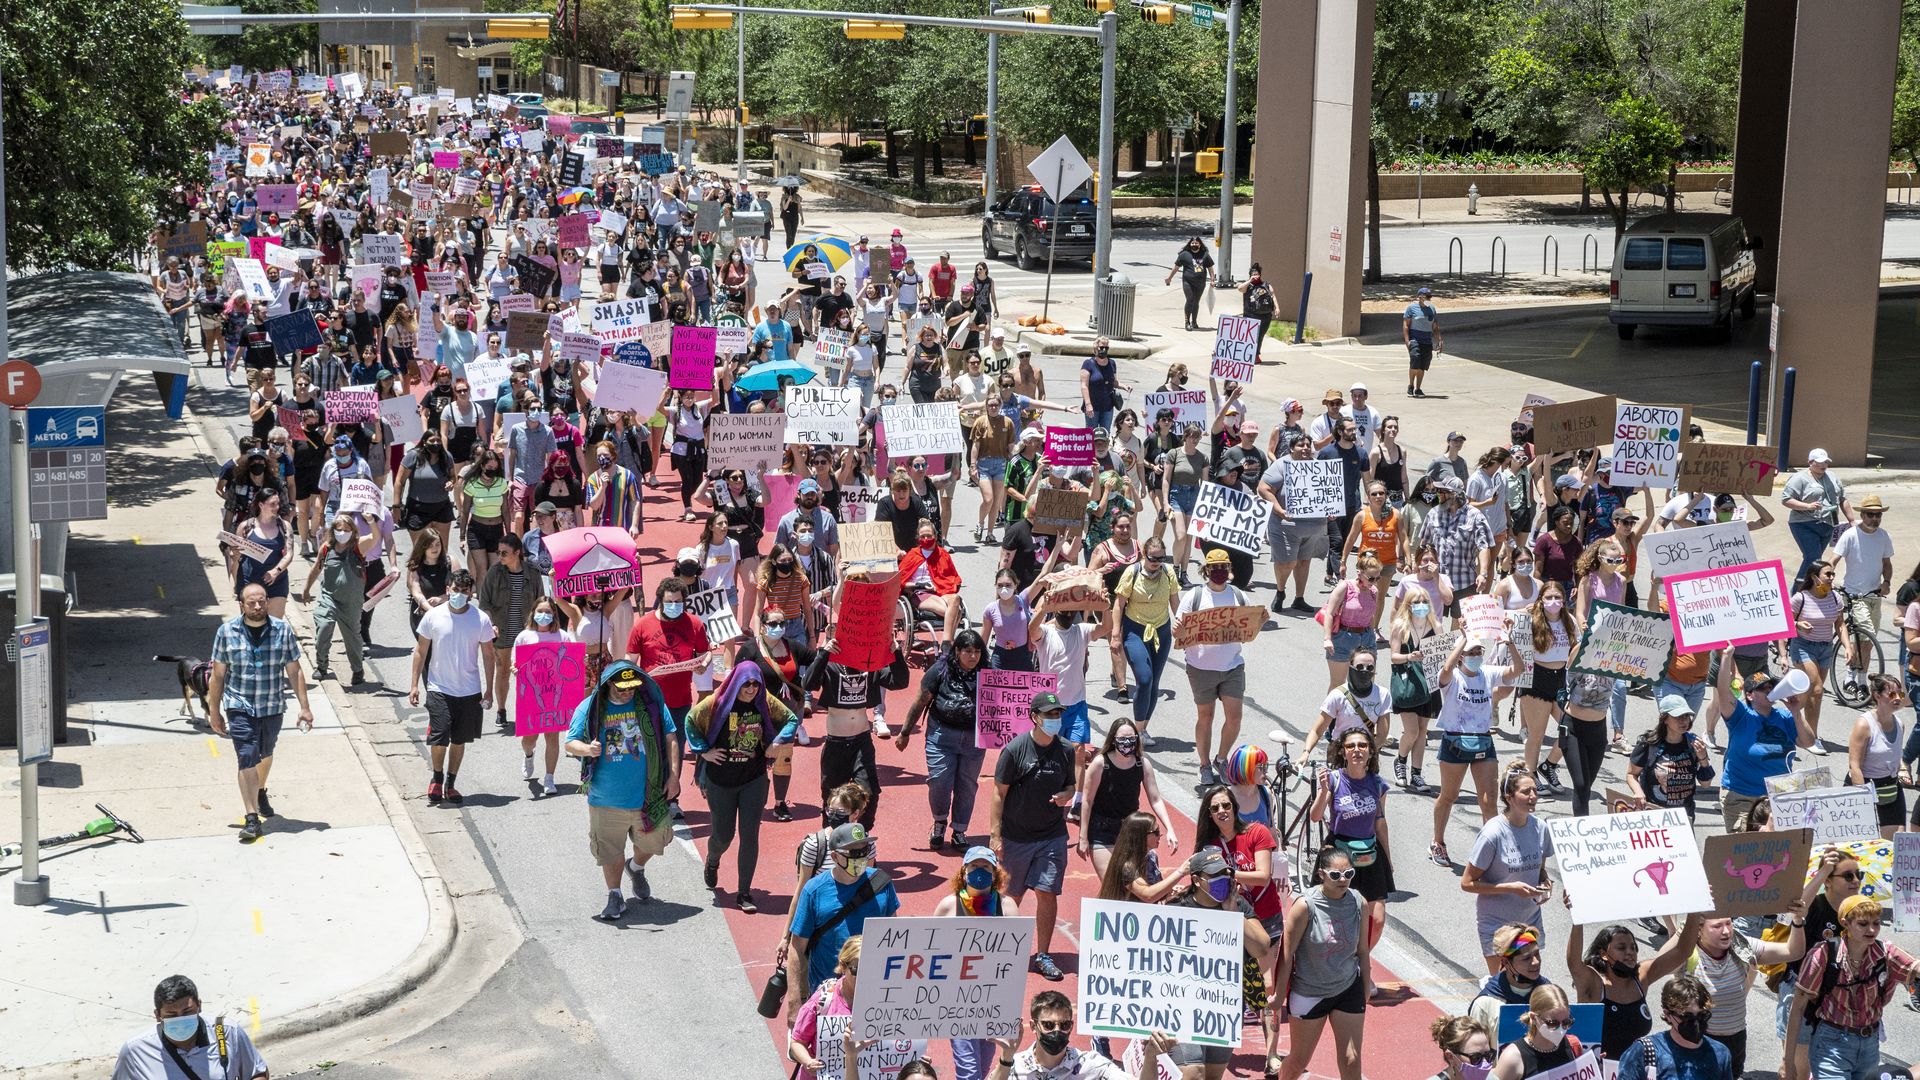 Protesters march down Lavaca Street at a protest outside the Texas state capitol on May 29, 2021 in Austin, Texa